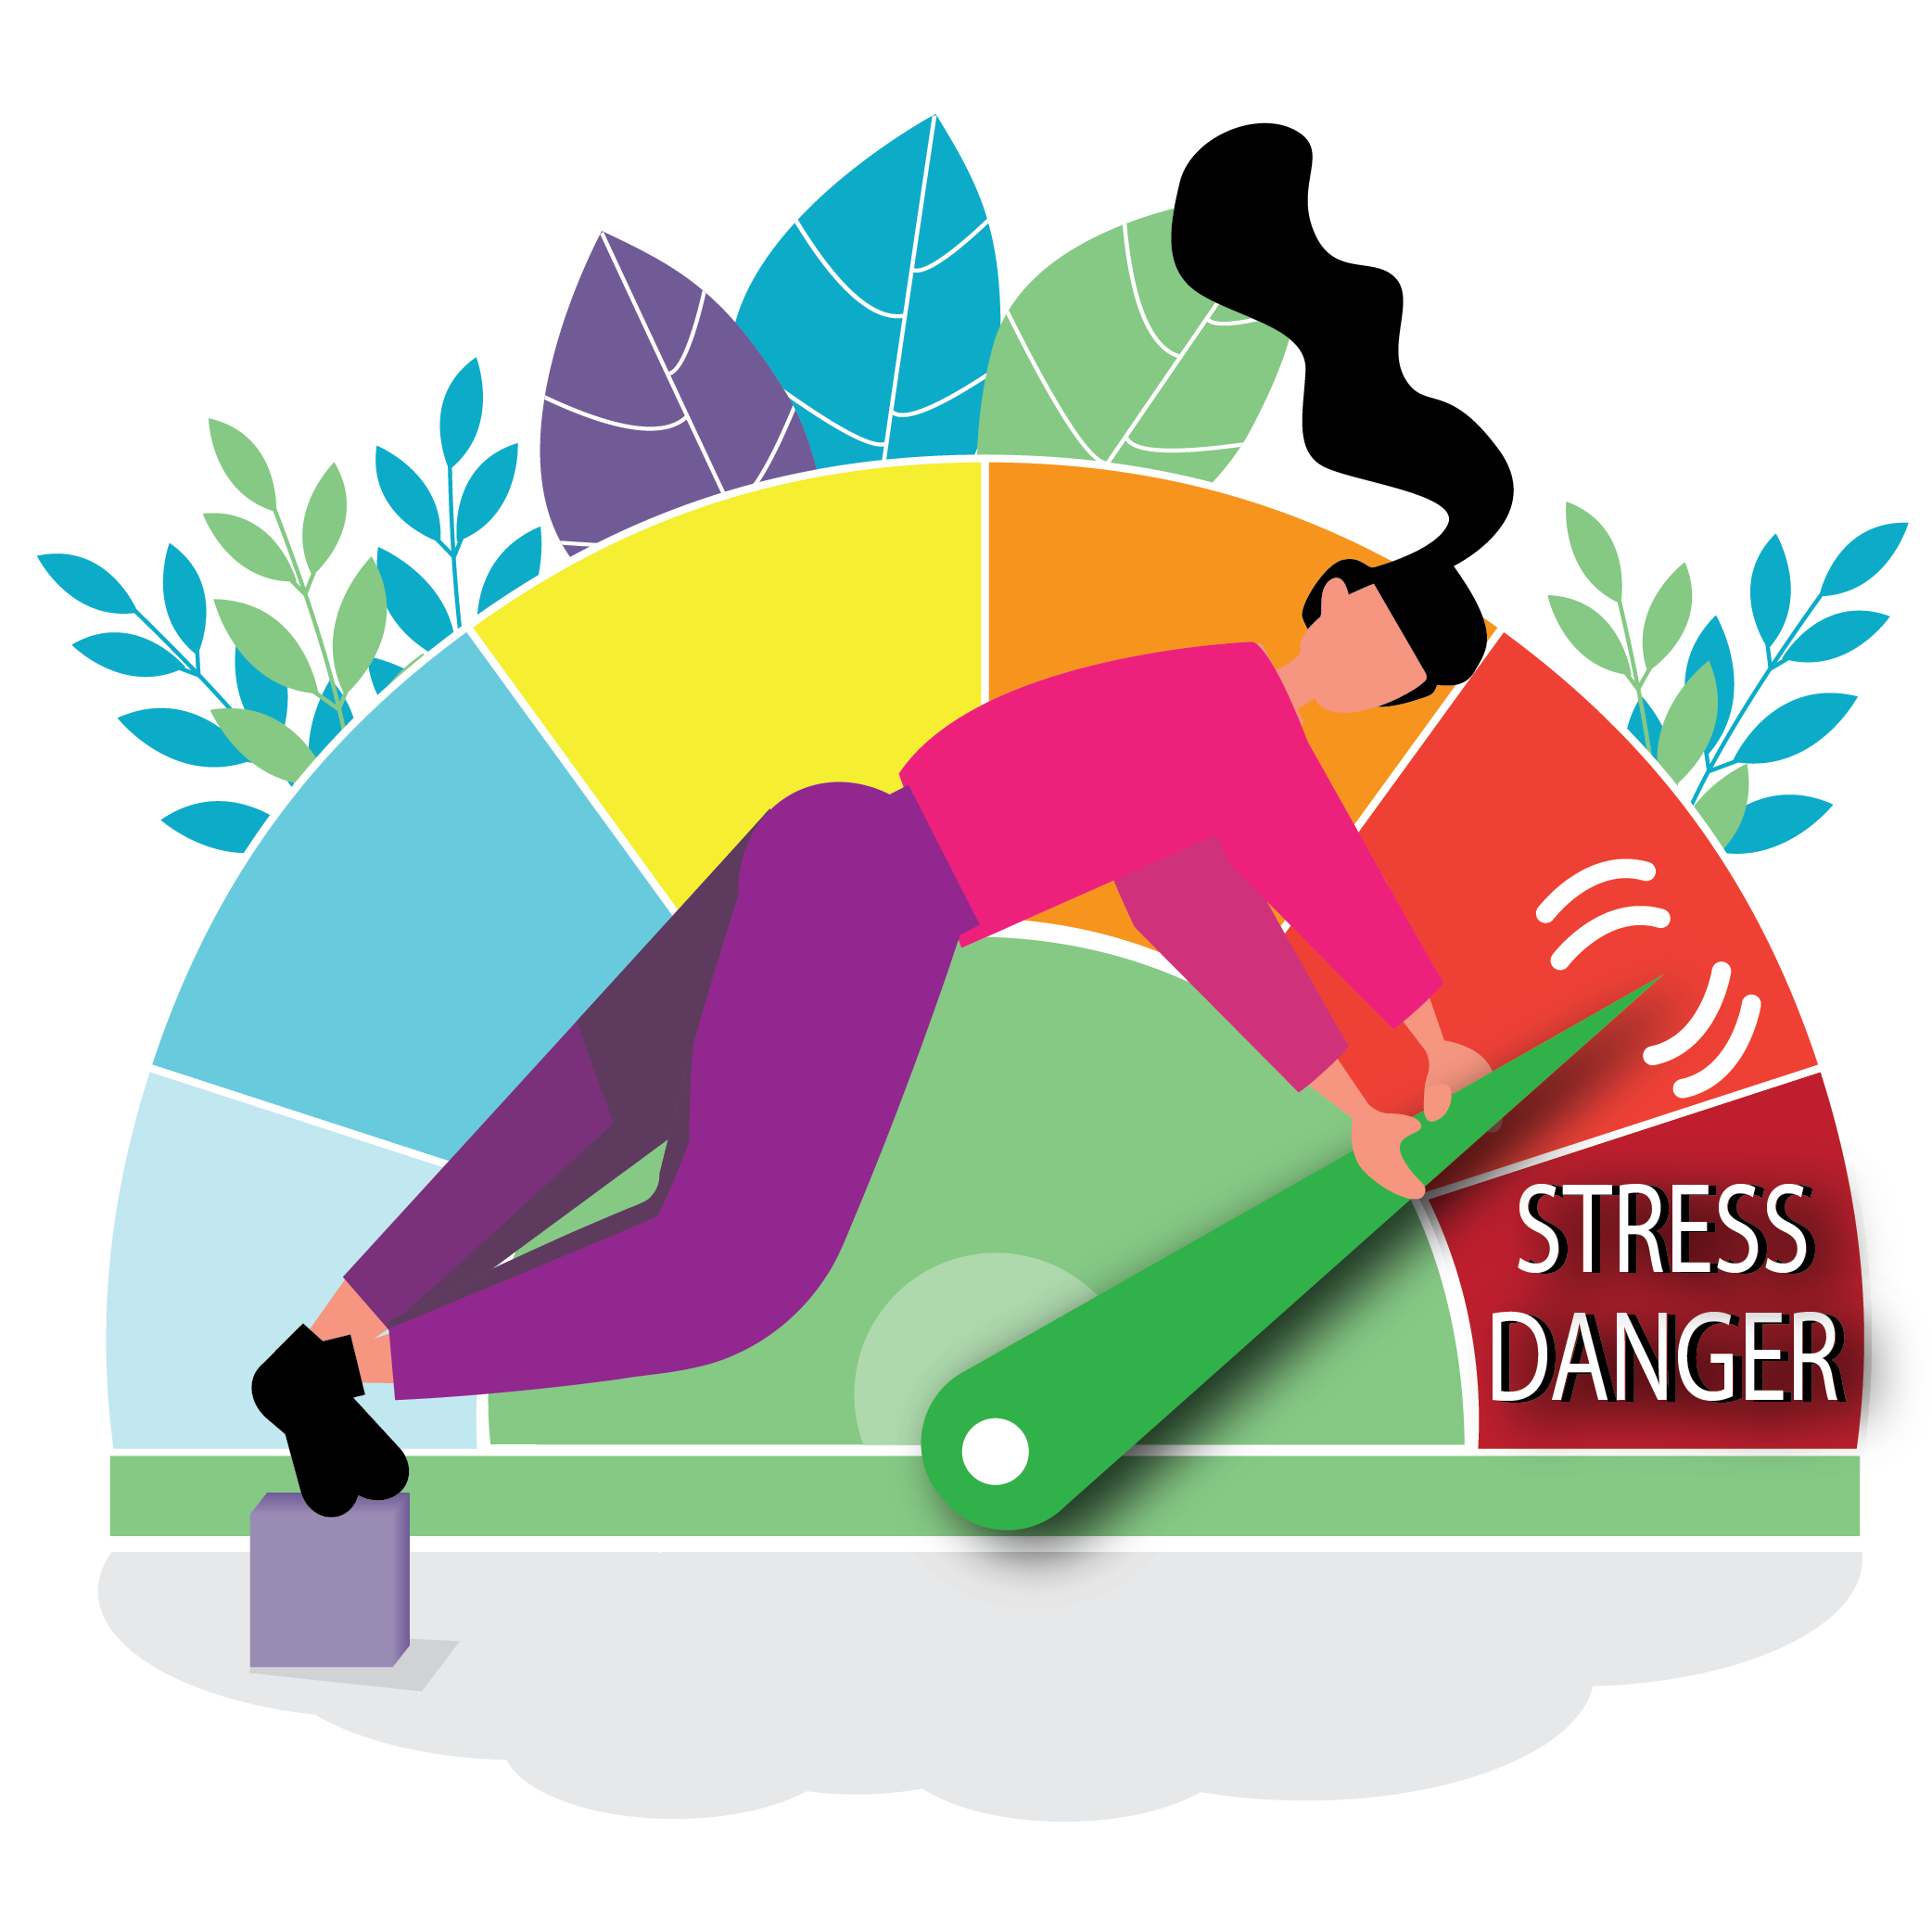 Illustration of a woman leaning on a graph measuring stress. The indicator is almost pointing to the stress level "stress danger" in a red section of the stress gauge 